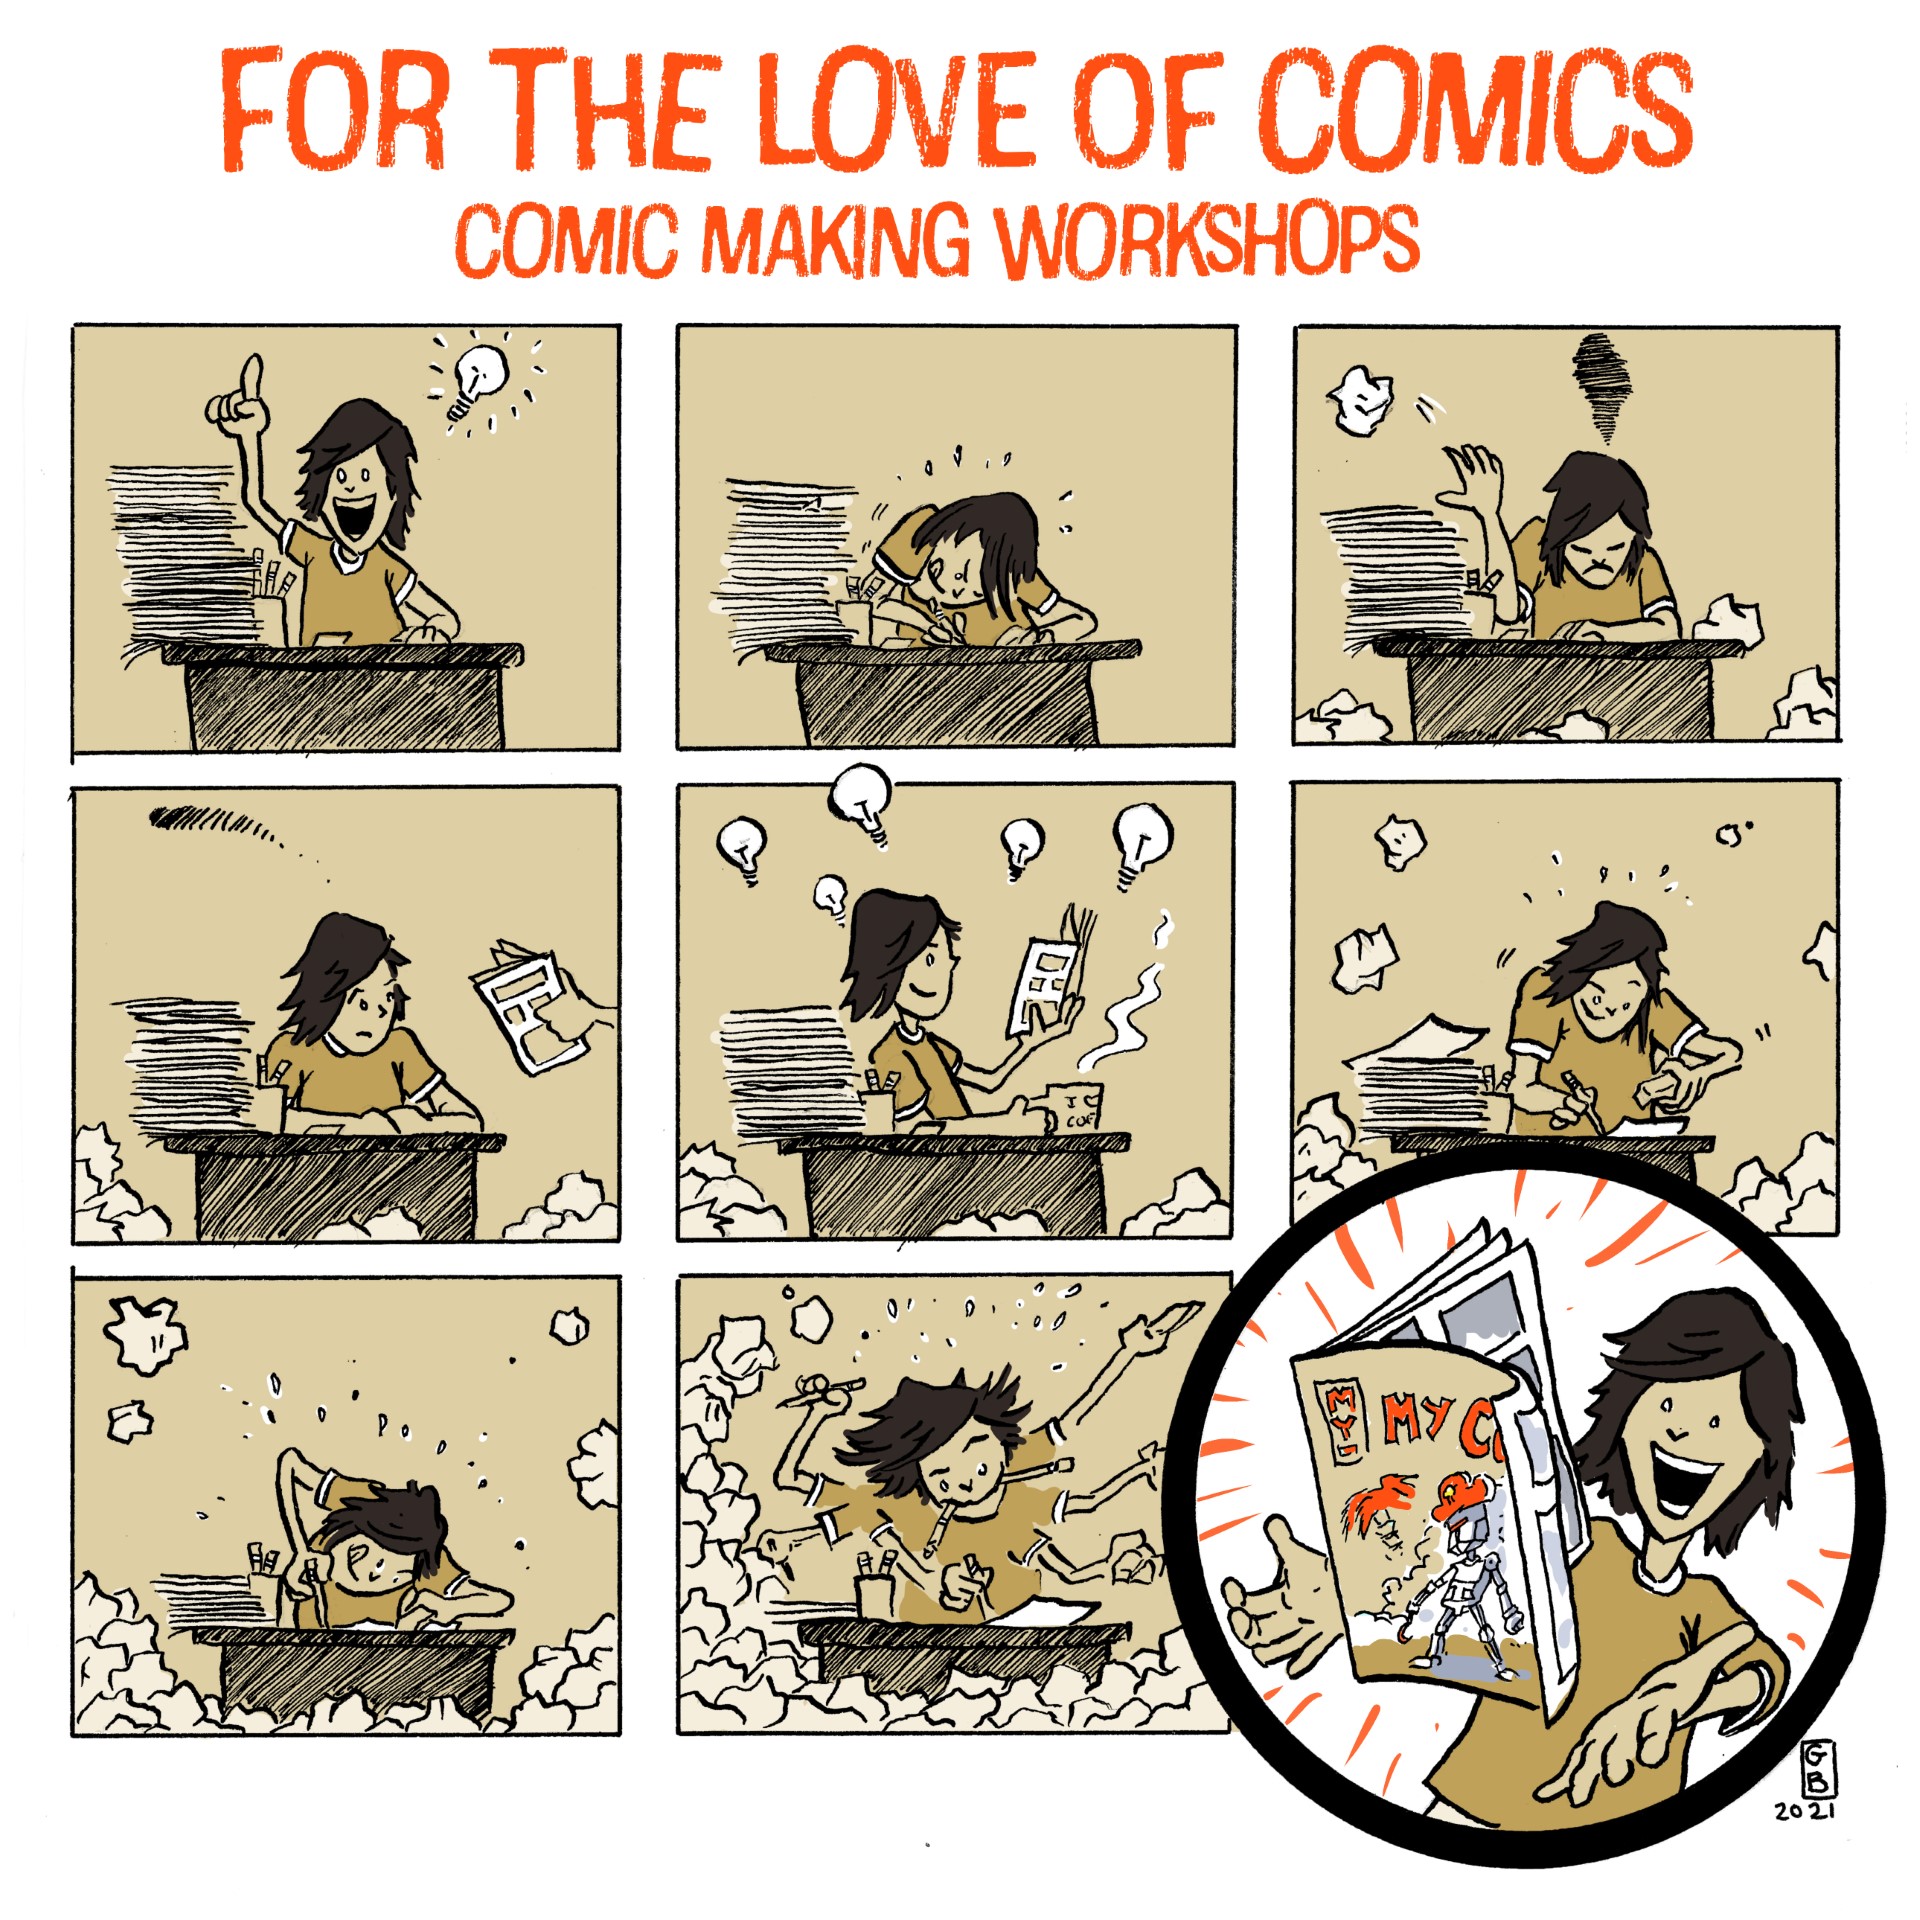 Image: For the Love of Comics: young woman drawing comics